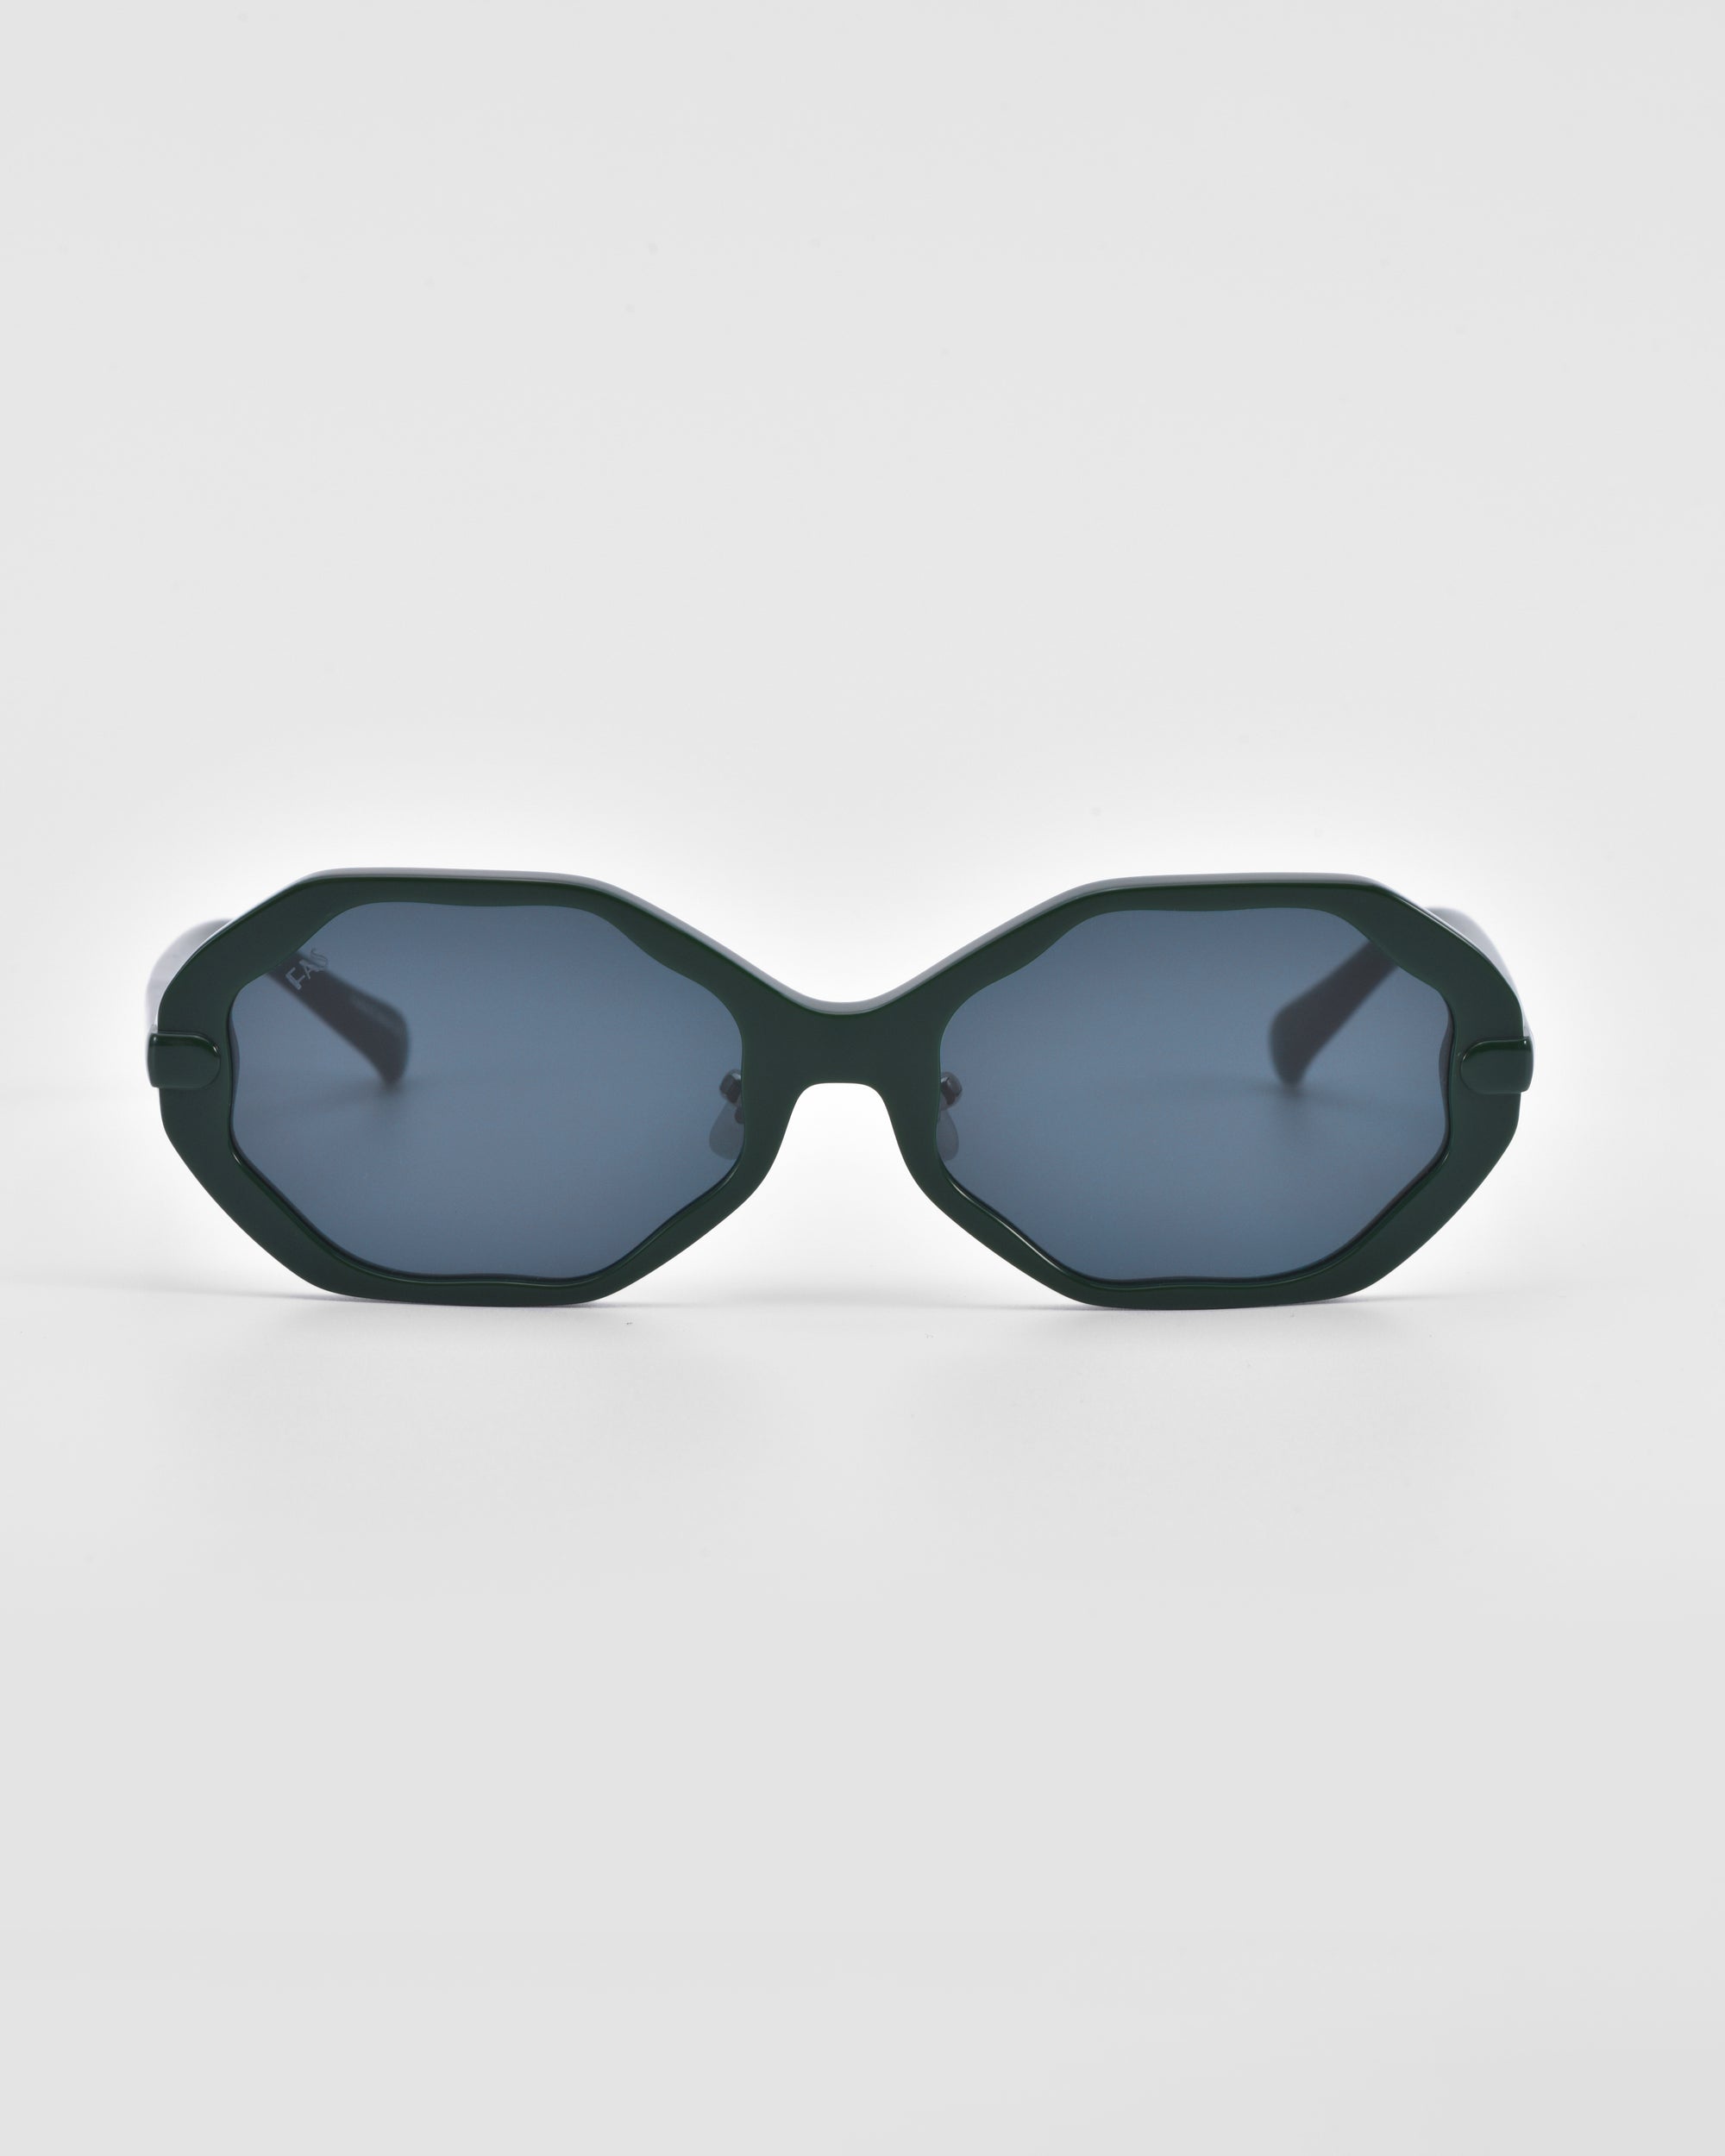 A pair of octagonal, dark green For Art's Sake® Lotus sunglasses with grey-tinted lenses is centered on a white background. The angular silhouette features a thick frame and jade-stone nose pads, offering a modern geometric design that creates a distinctive, stylish look.